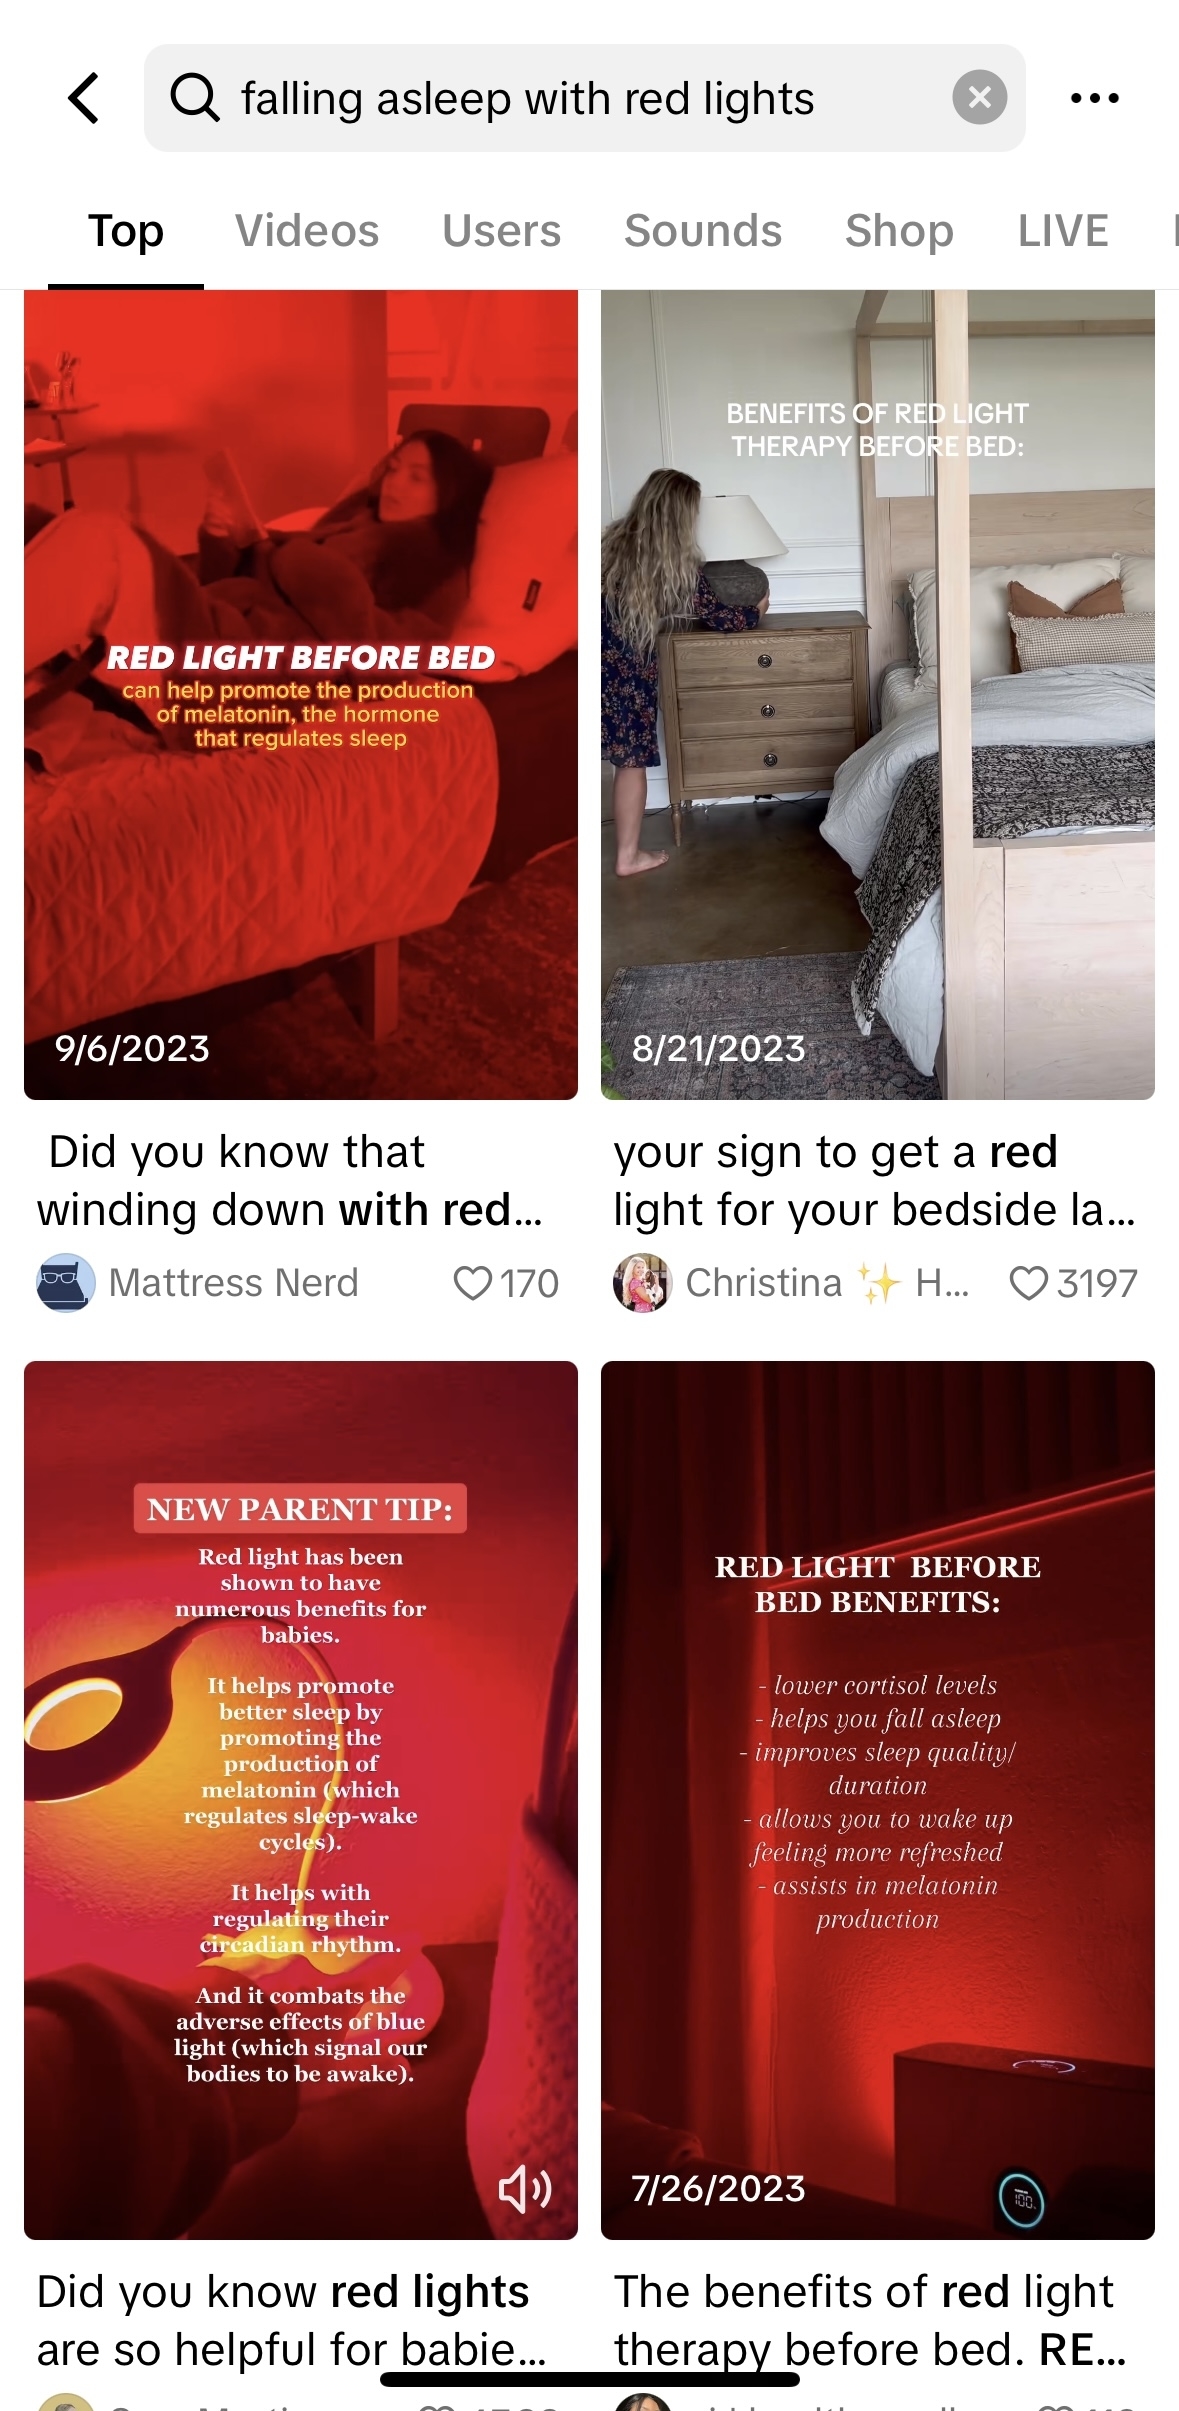 Collage of four images showcasing benefits and uses of red light therapy for sleep